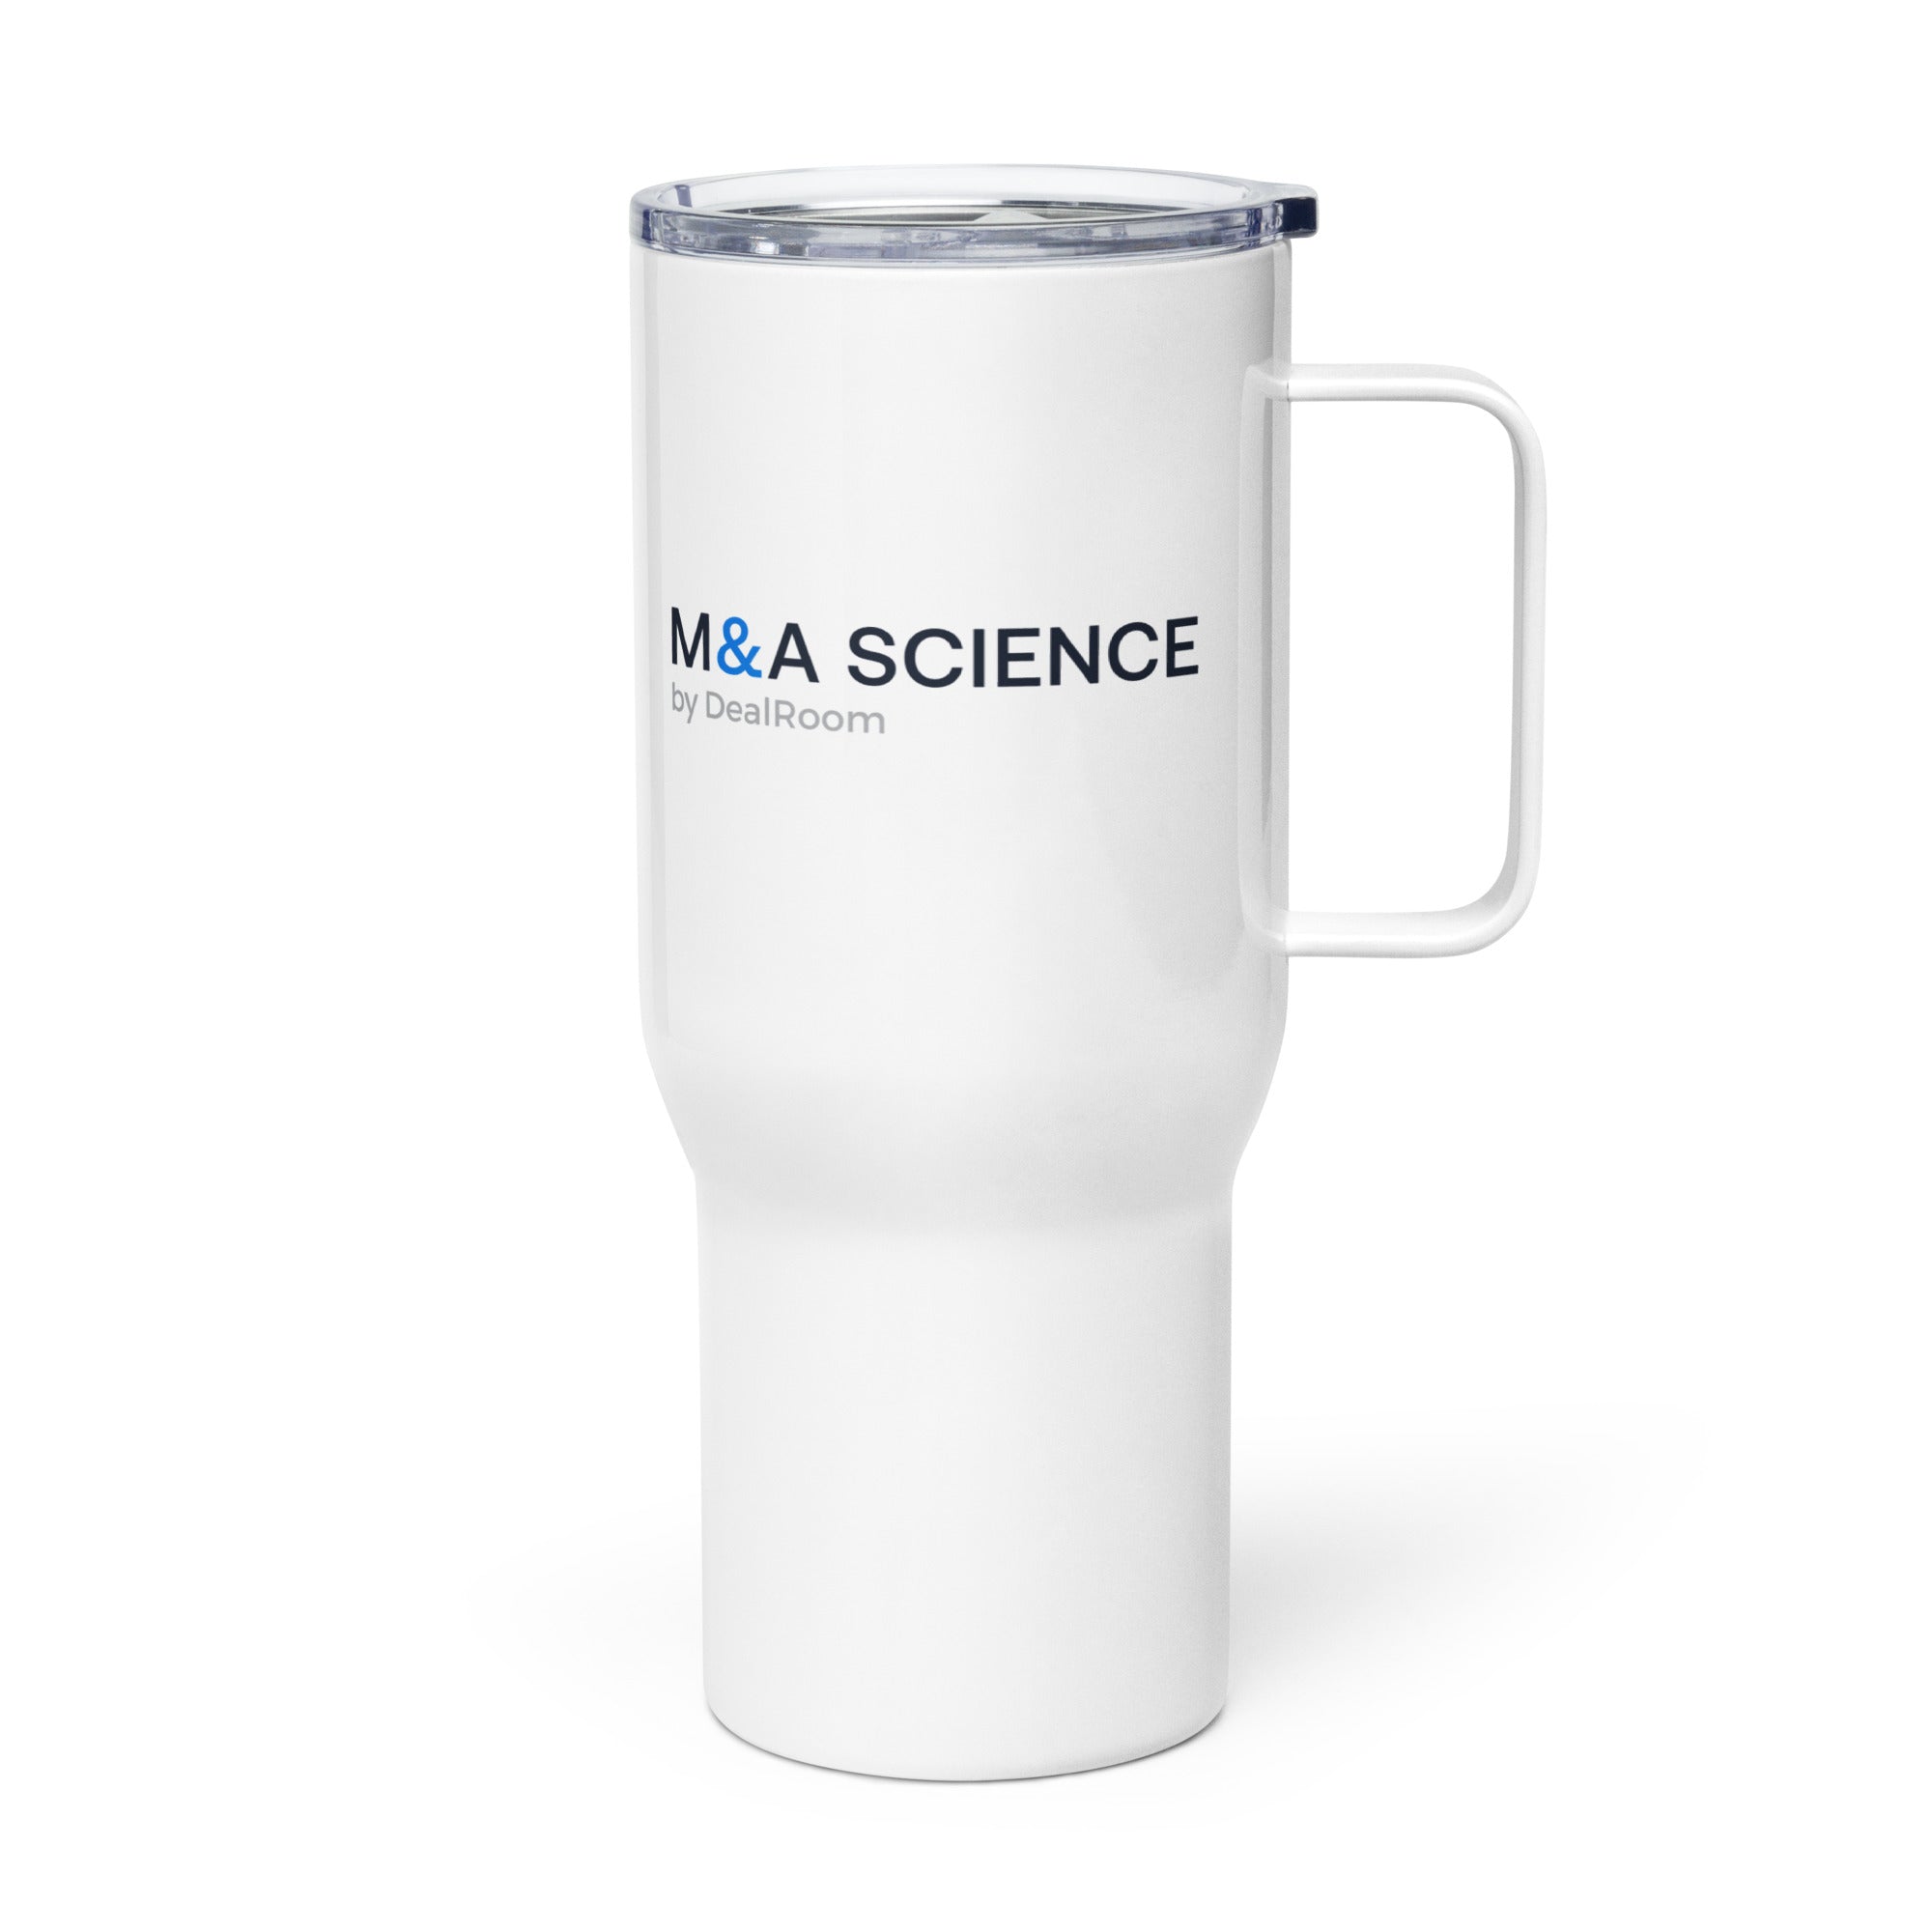 M&A Science Travel mug with a handle